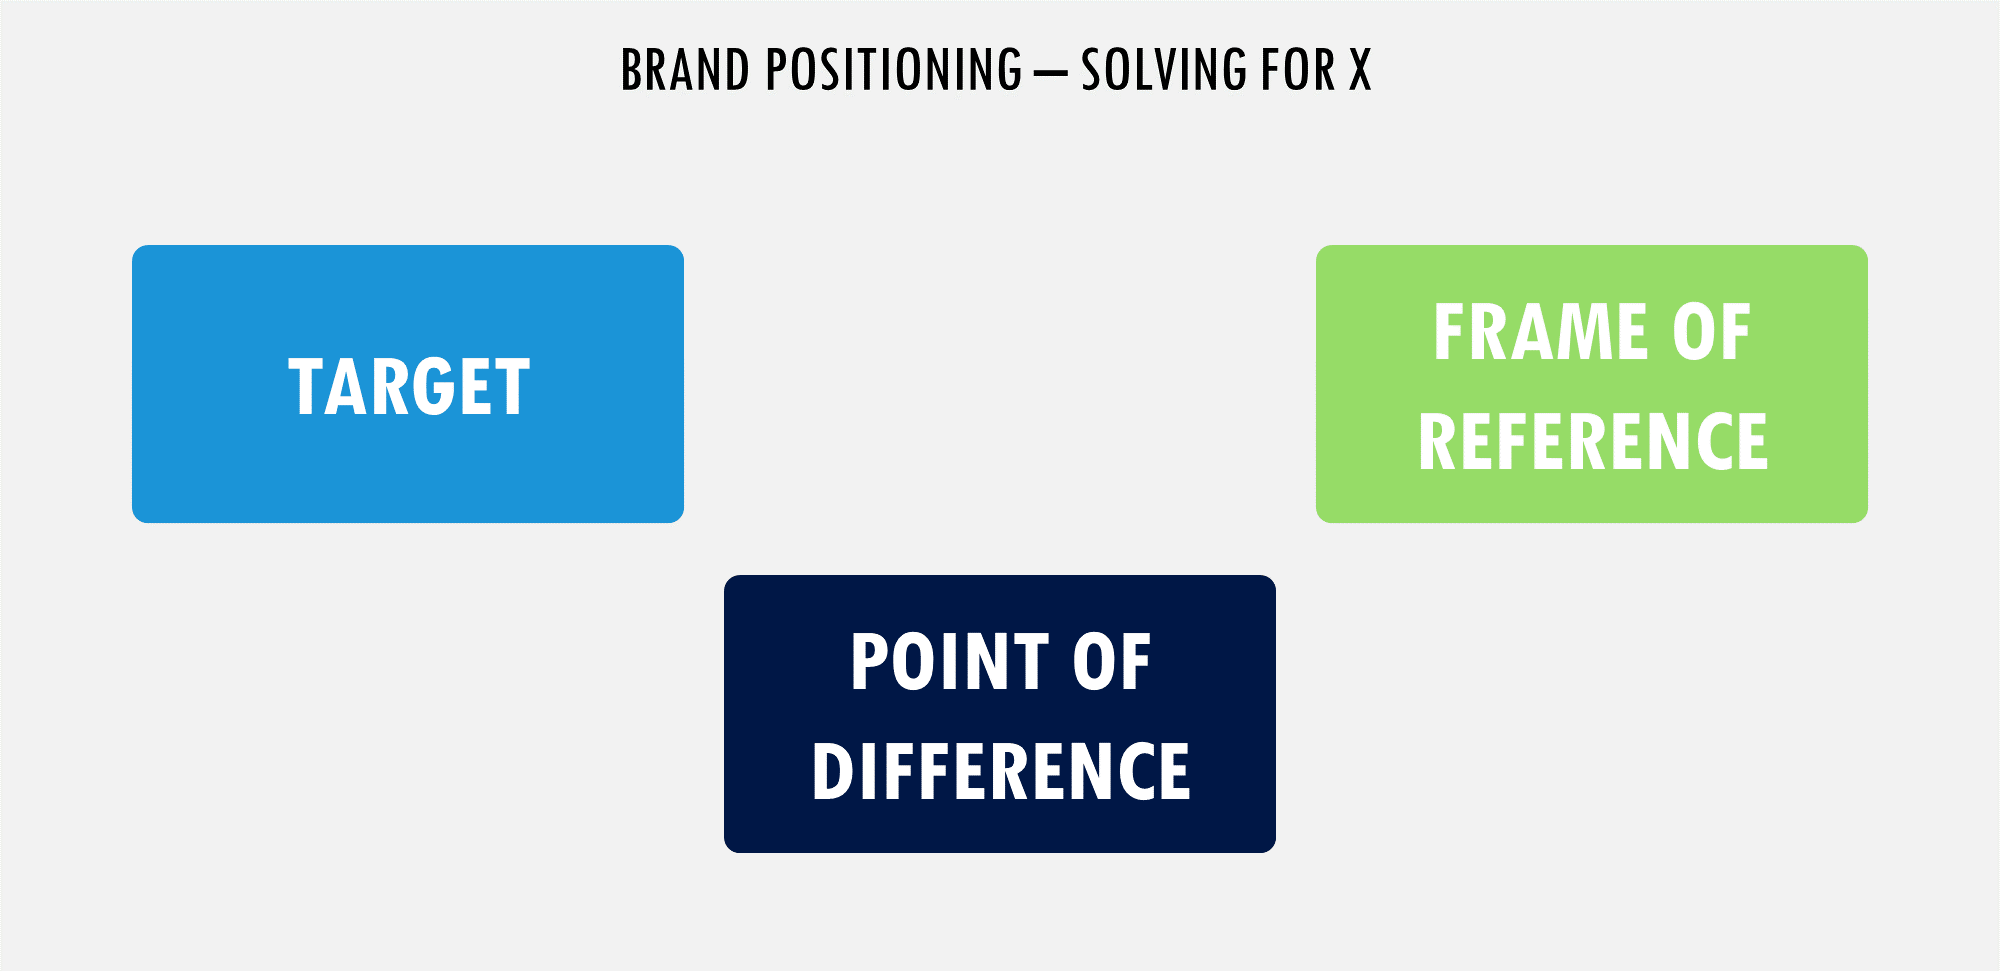 Brand Positioning - Solving for X